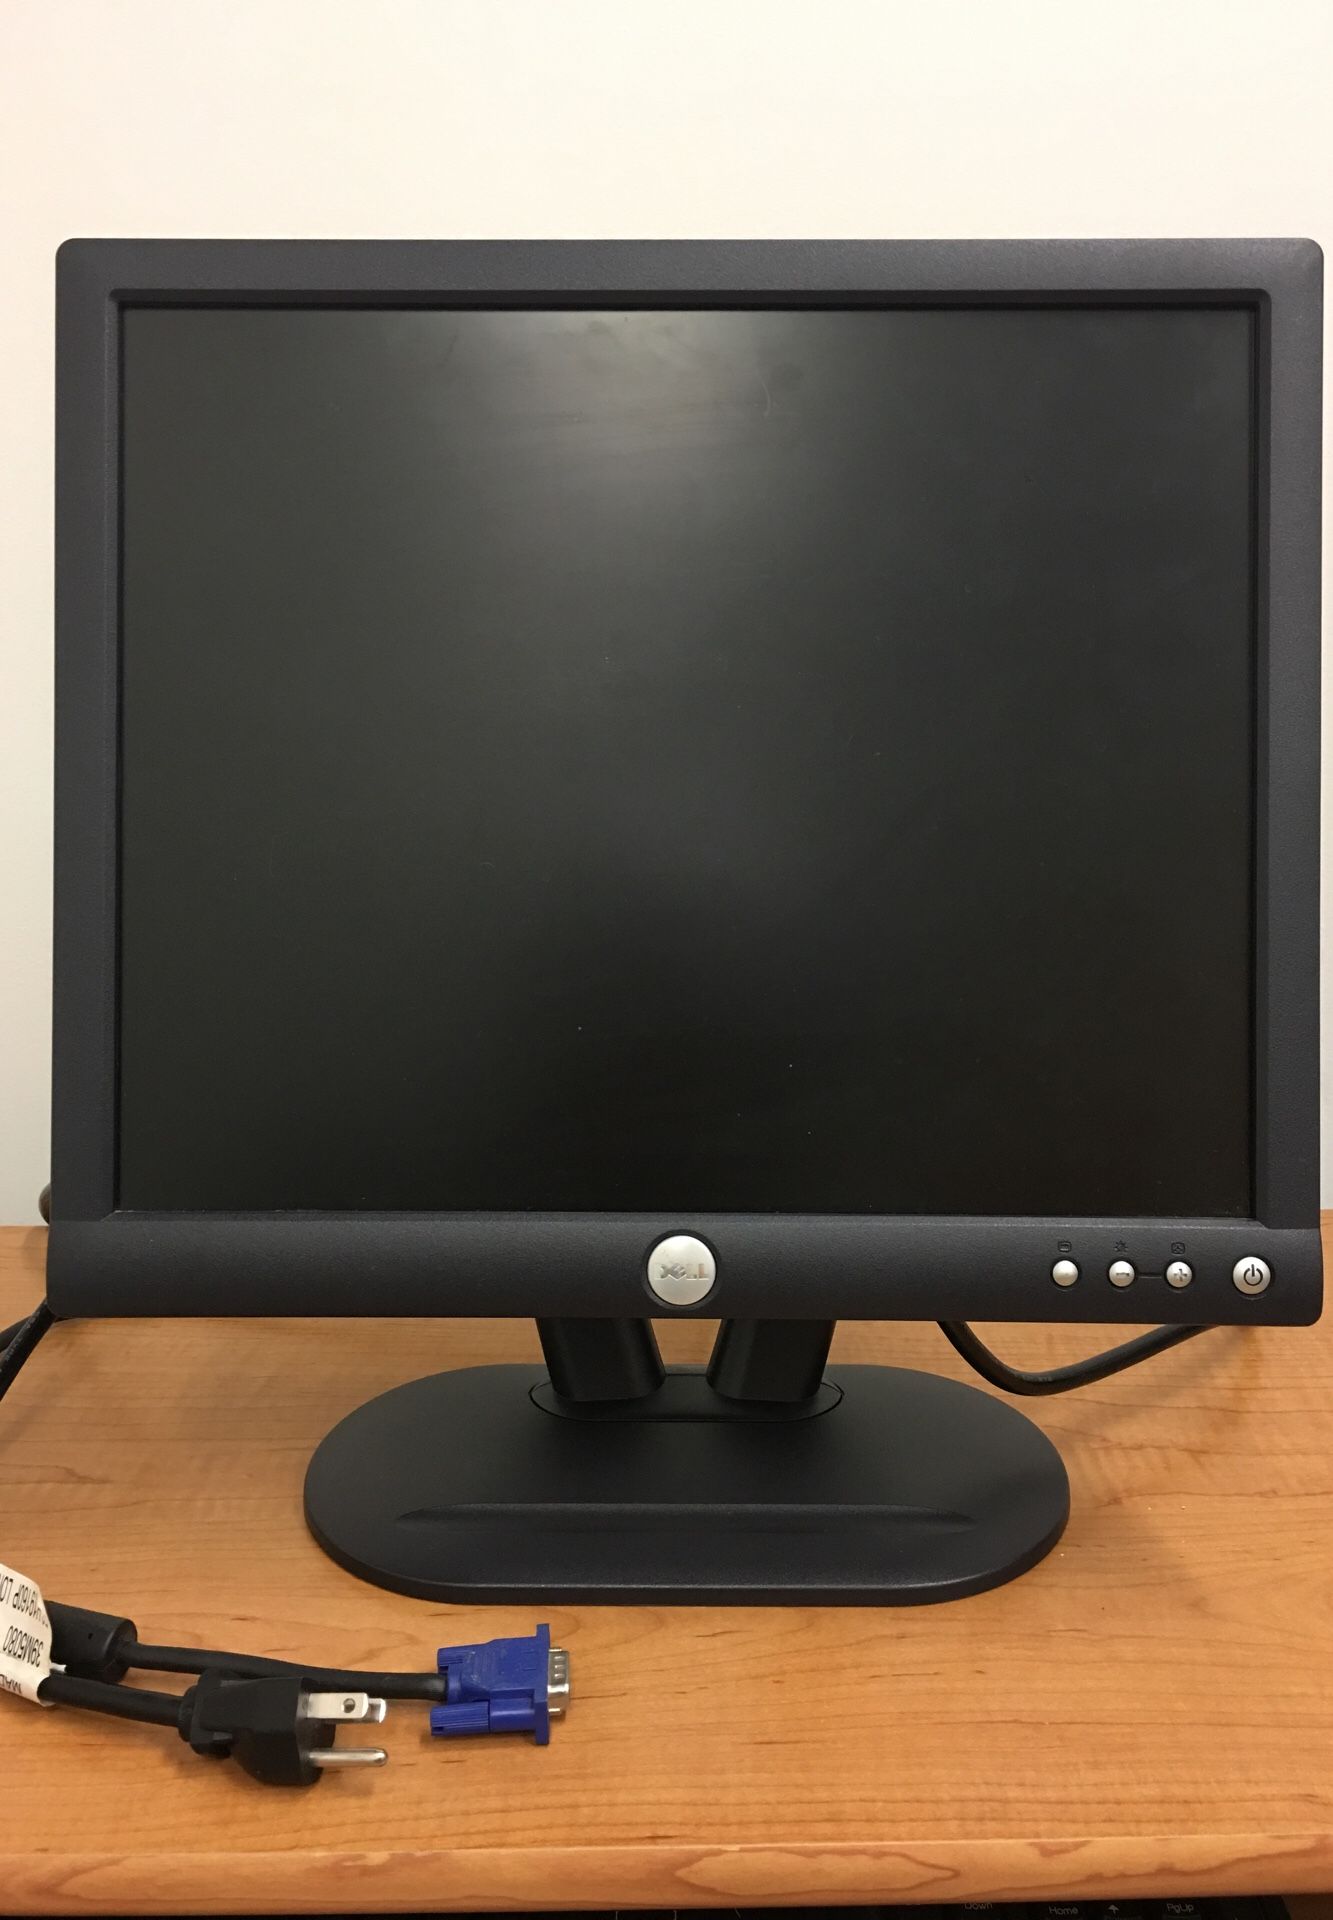 Dell LCD monitor 17” with power cord & VGA cable